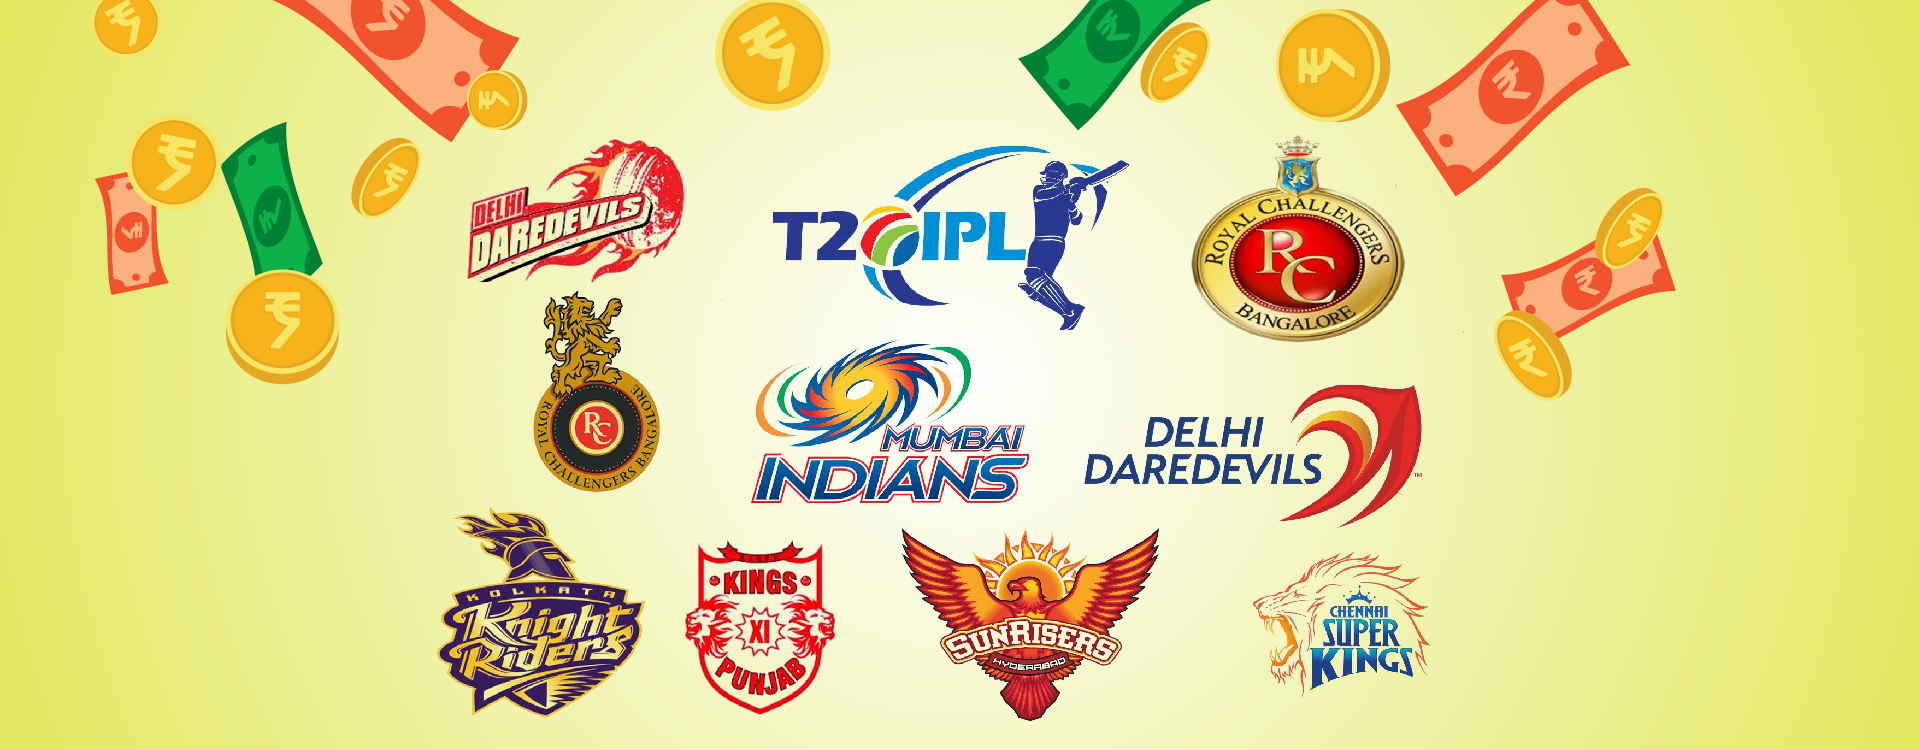 The brand valuation of an IPL franchise keeps on getting bigger with the most number of IPL titles won.